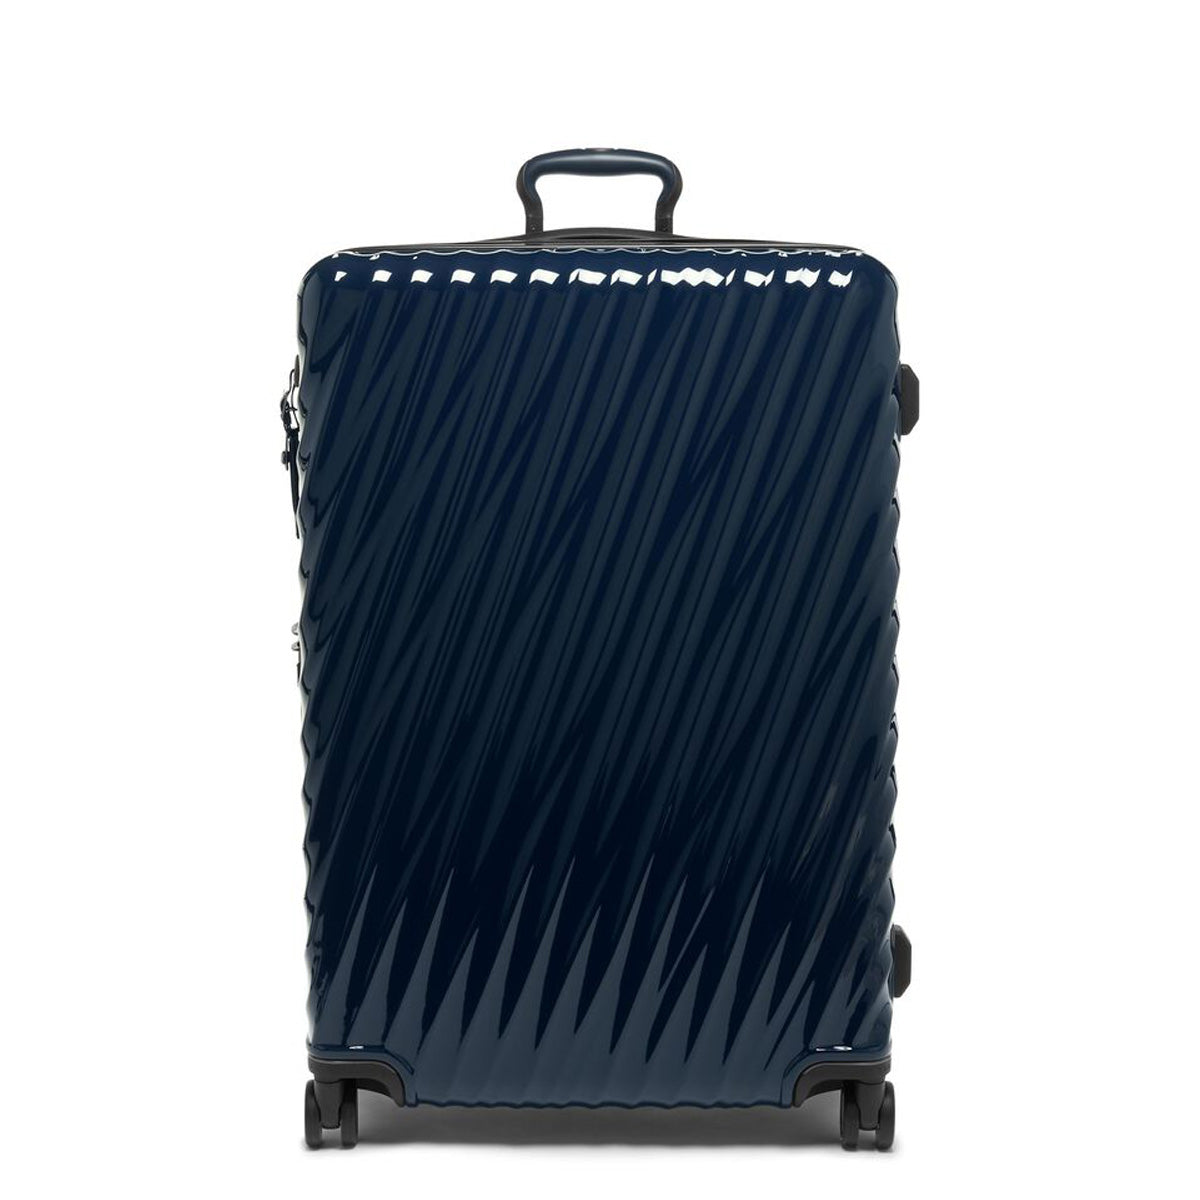 Tumi 19 Degree Extended Trip Expandable Packing Case - Navy